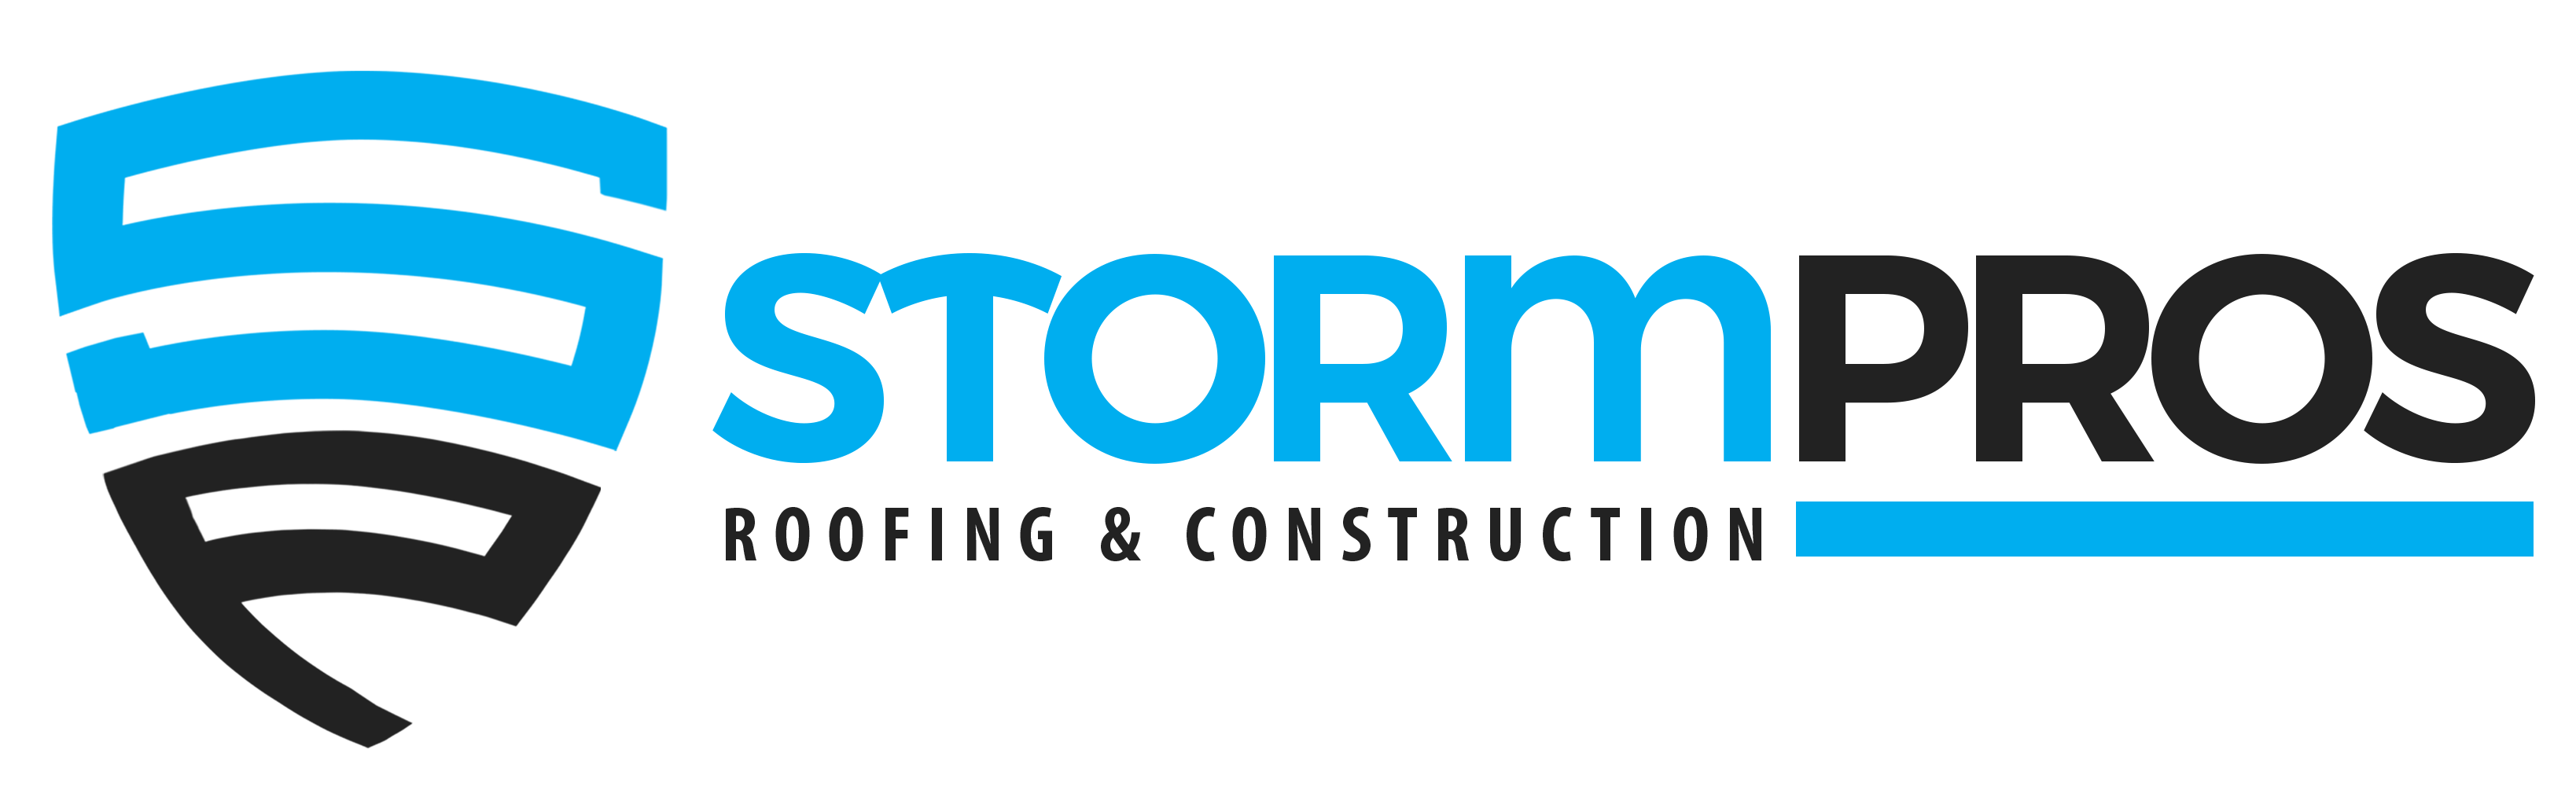 STORM PROS ROOFING & CONSTRUCTION